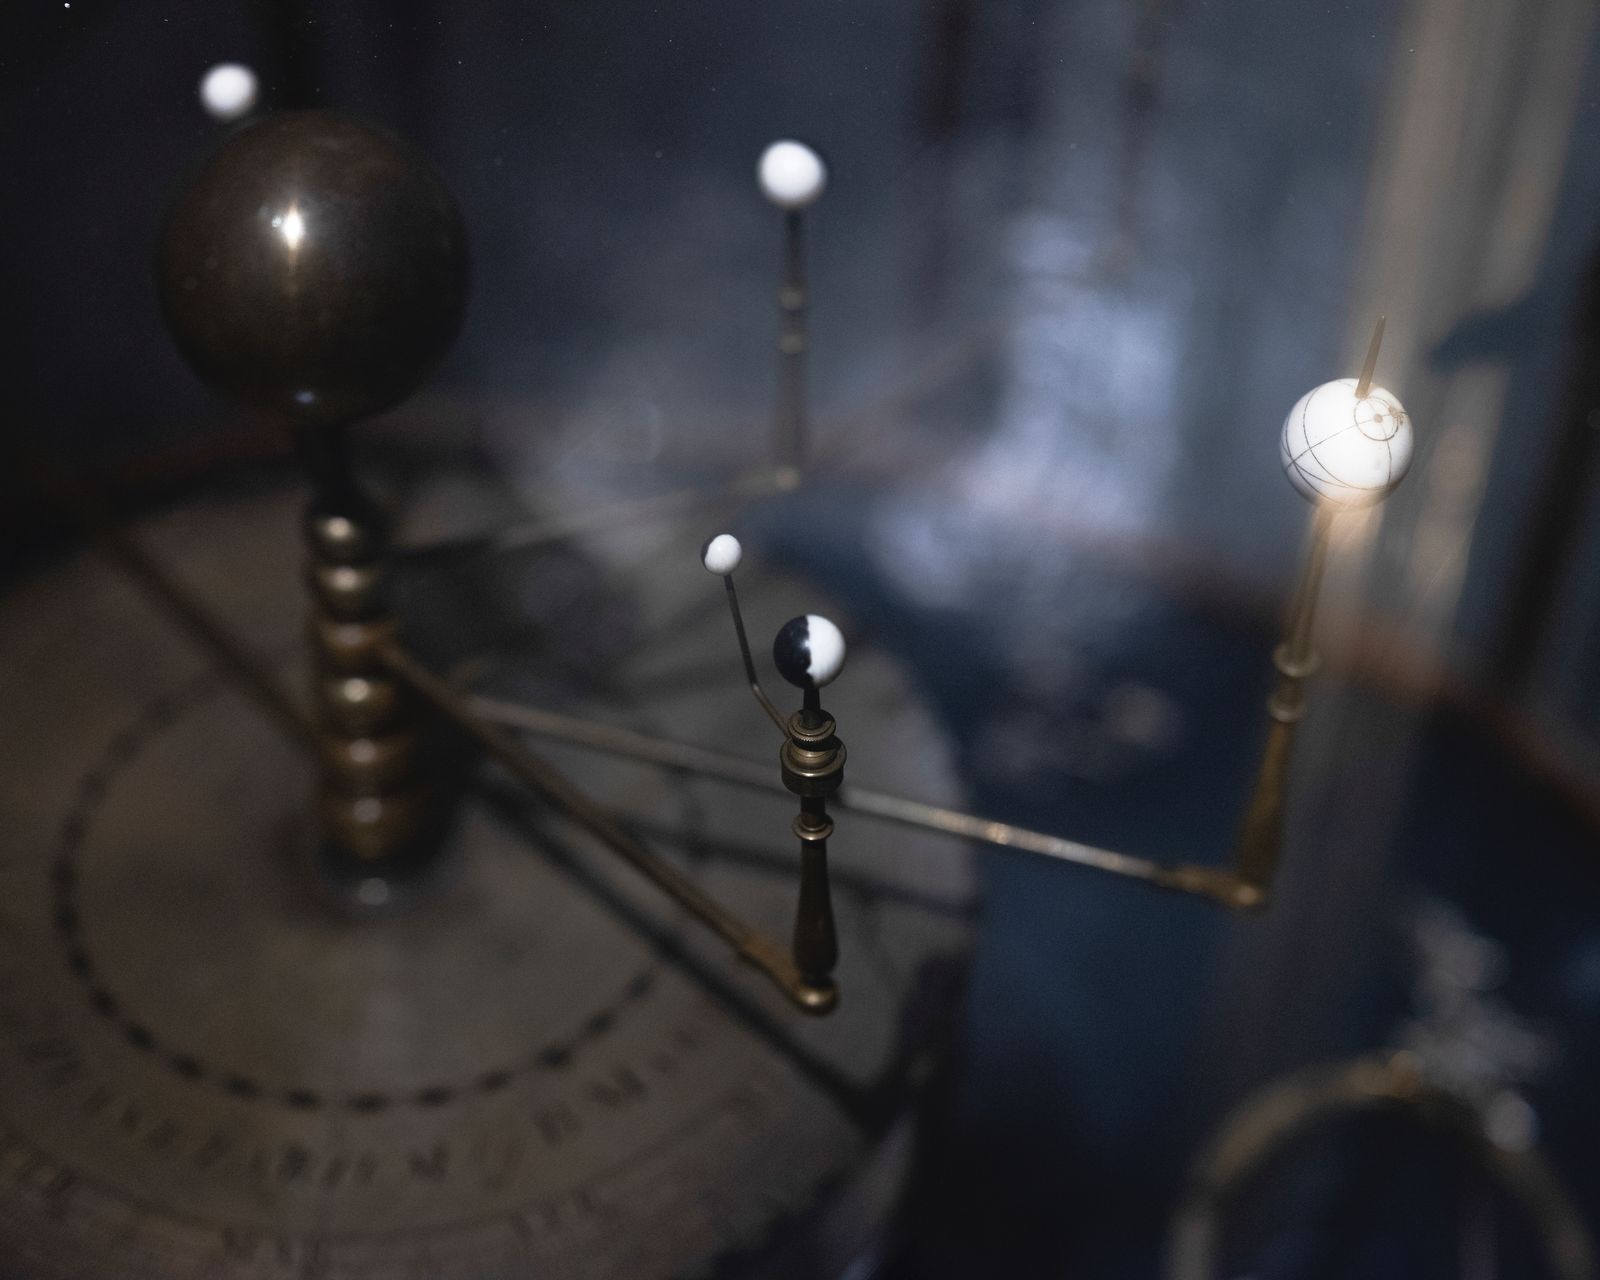 © Emilia Martin - "The Spaces in between" An orrery as a representation of a universe contained, limited and comprehensible.